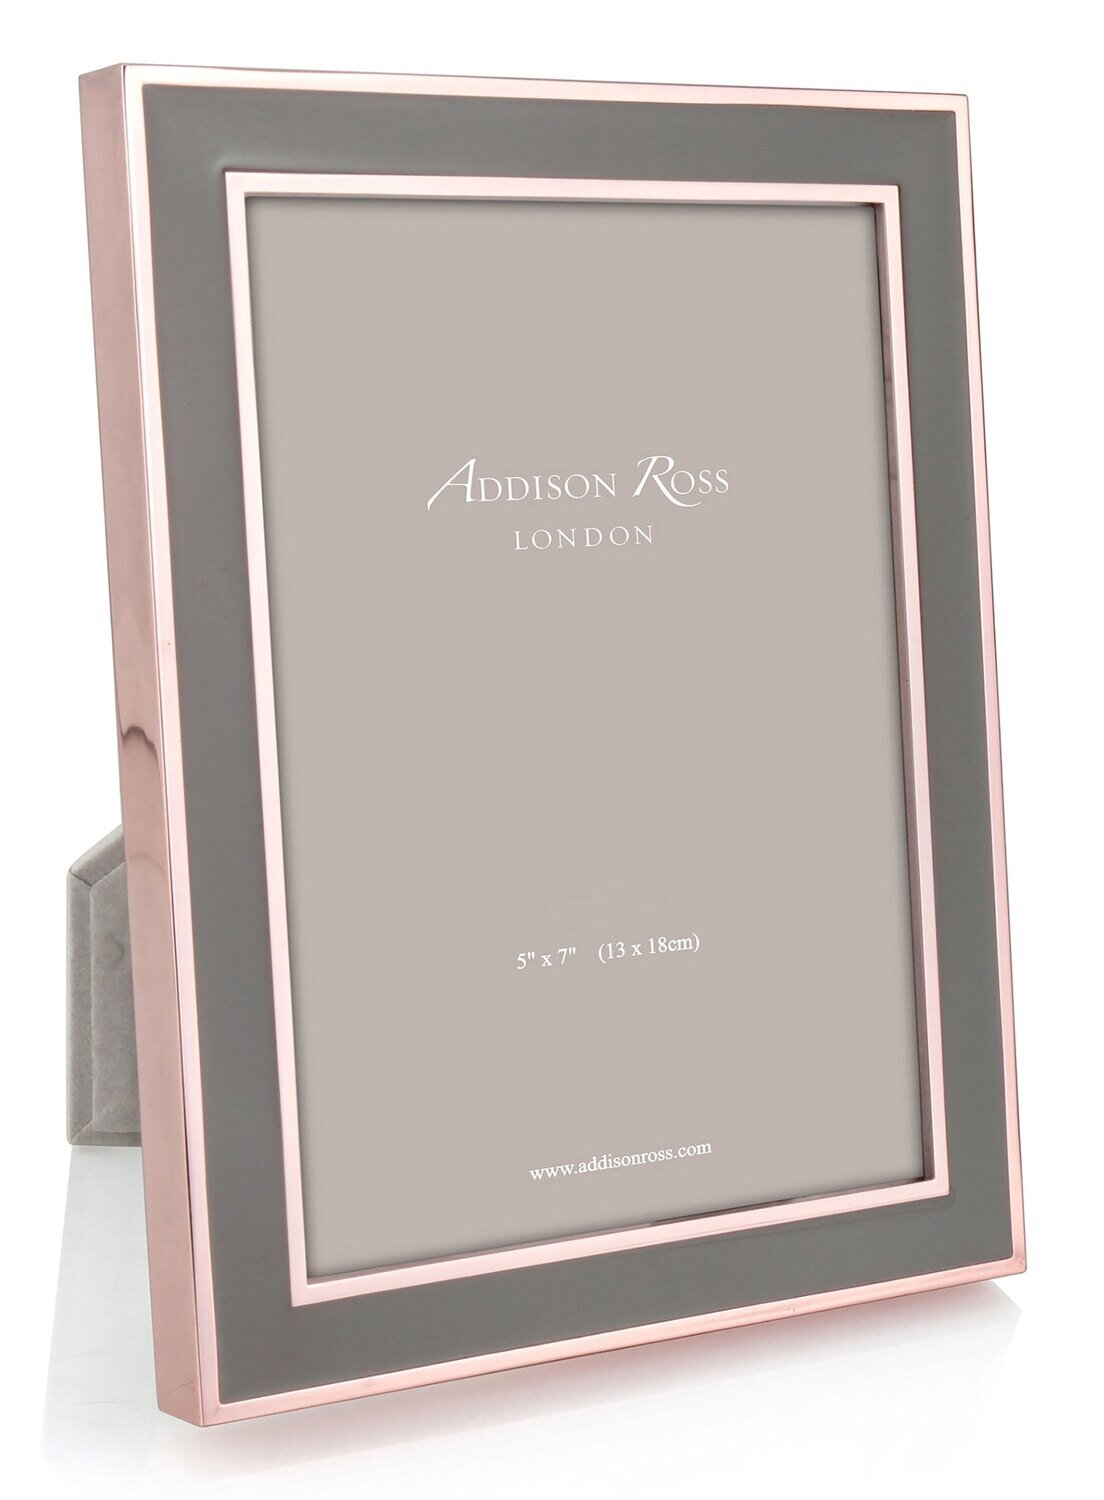 Addison Ross Taupe Enamel & Rose Gold Picture Frame 5 x 7 Inch Rose Gold FR1852